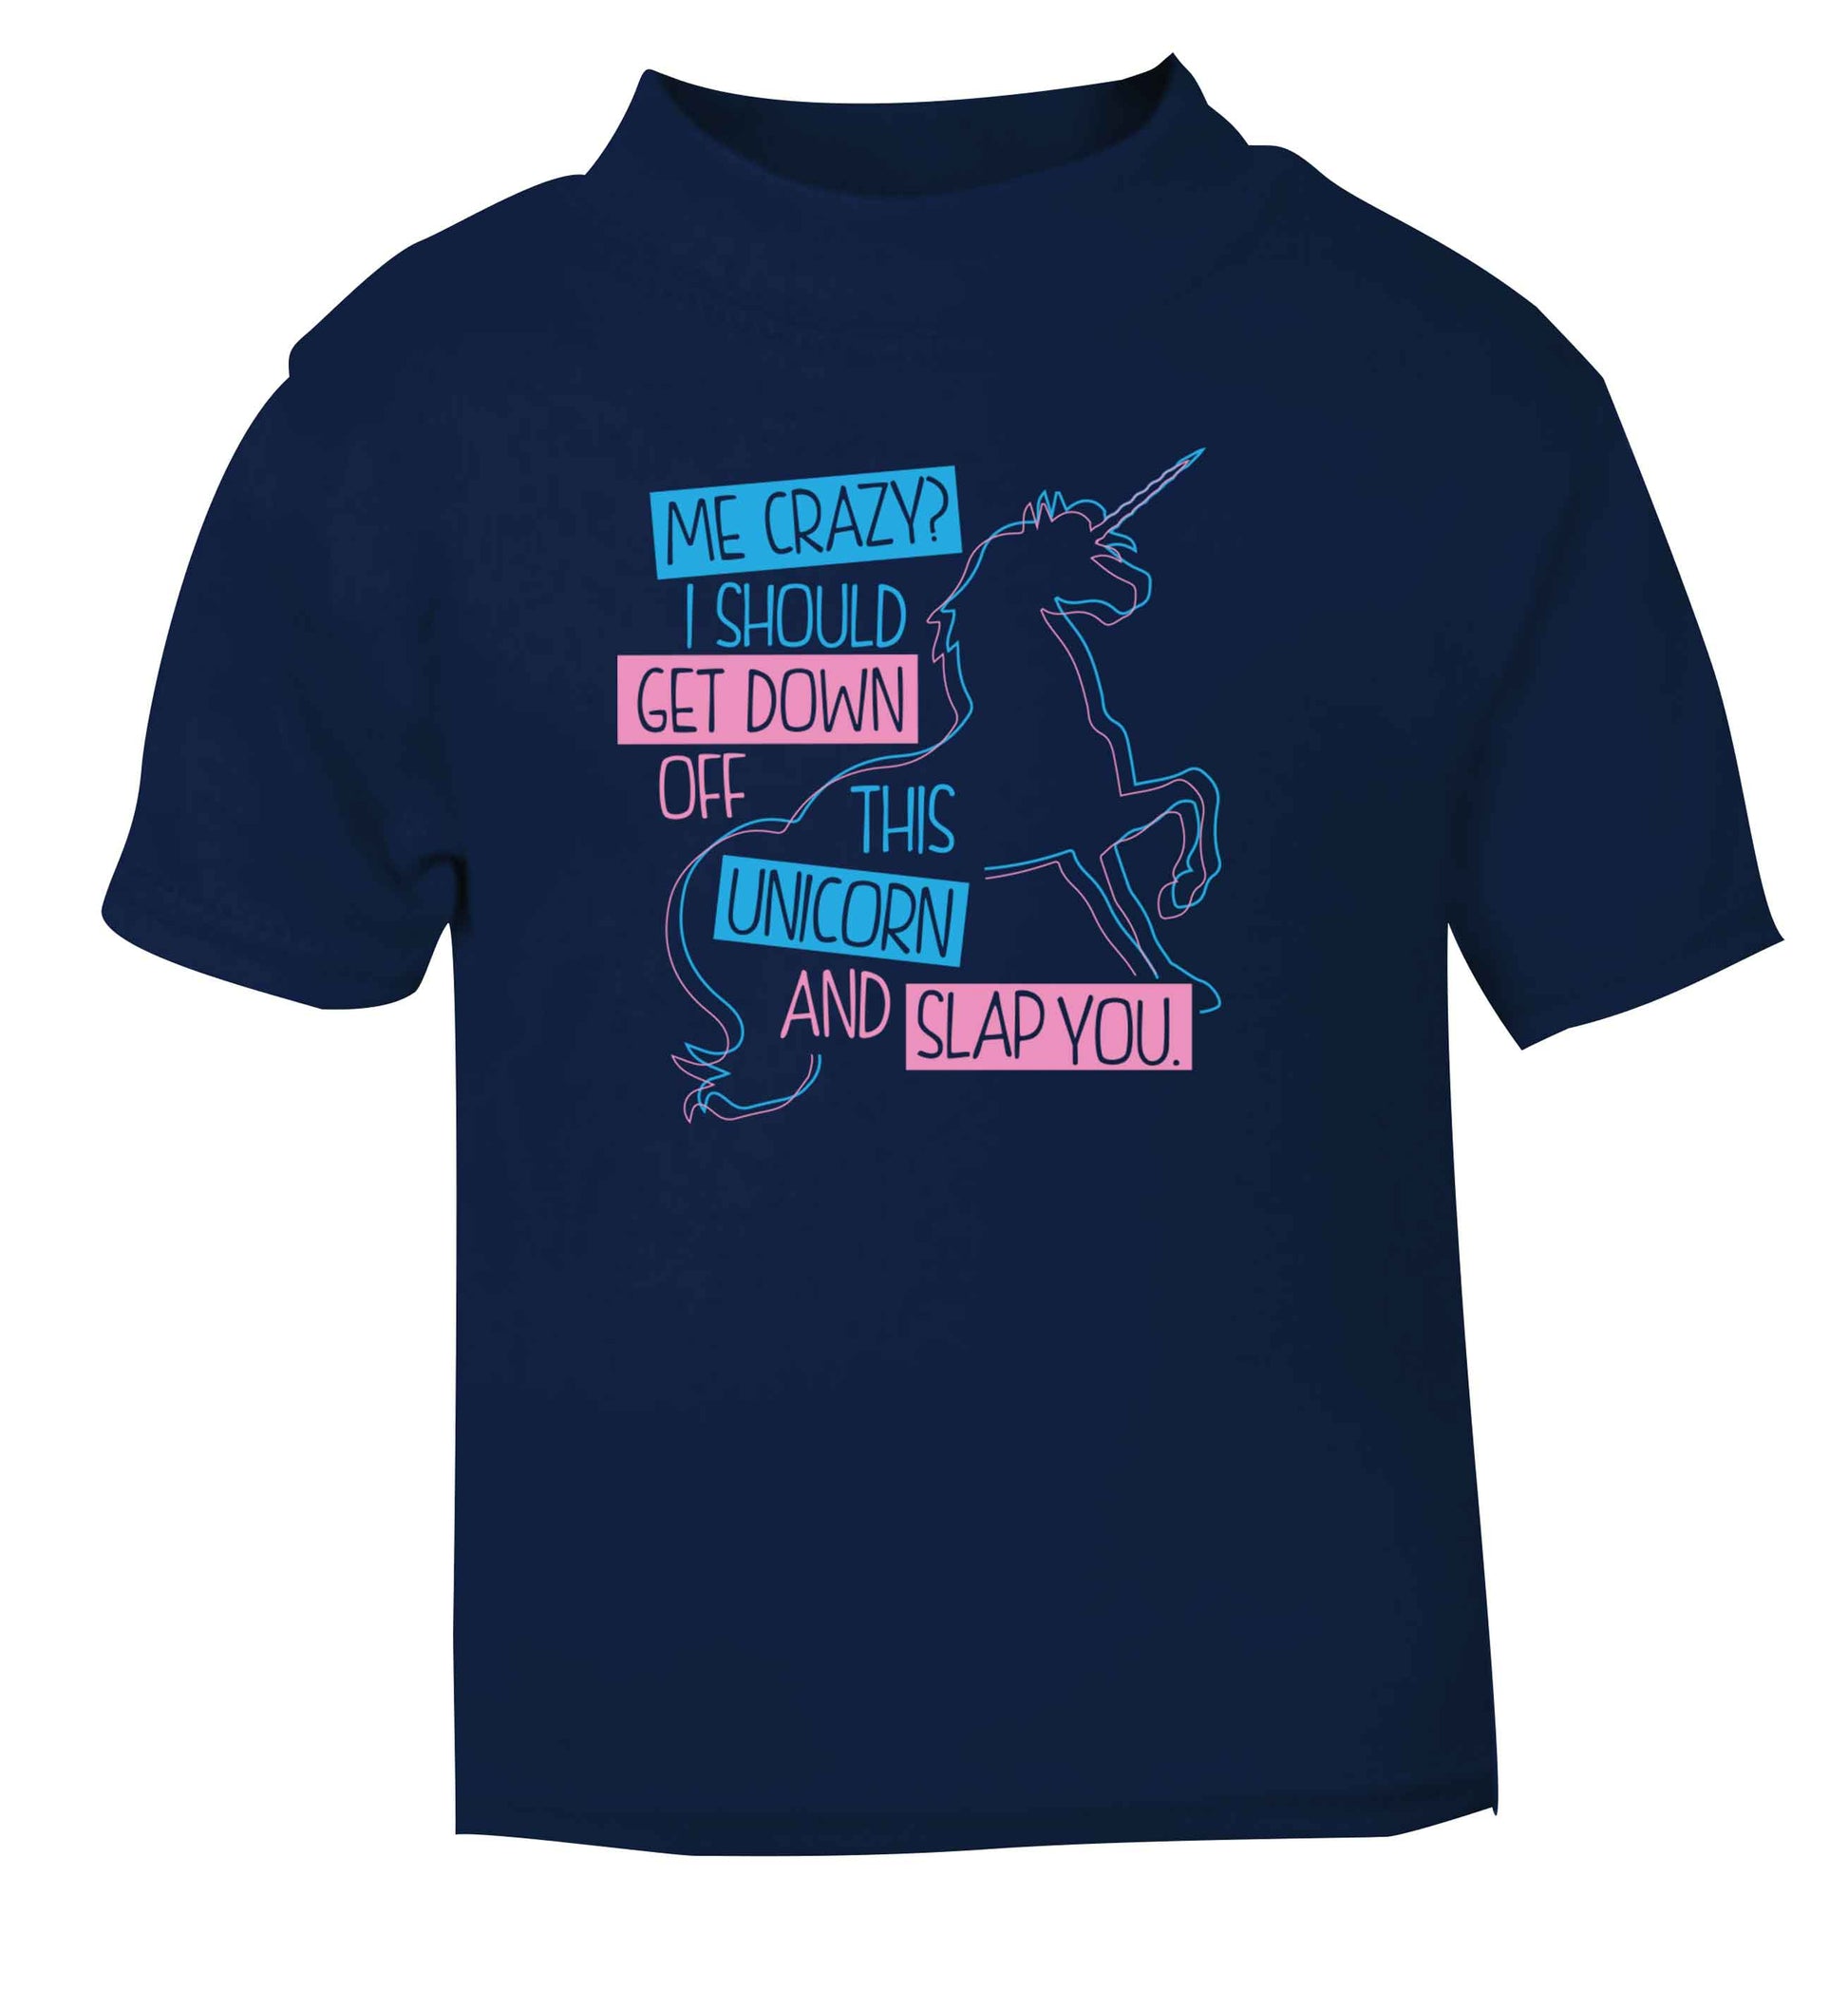 Me crazy? I should get down off this unicorn and slap you navy Baby Toddler Tshirt 2 Years